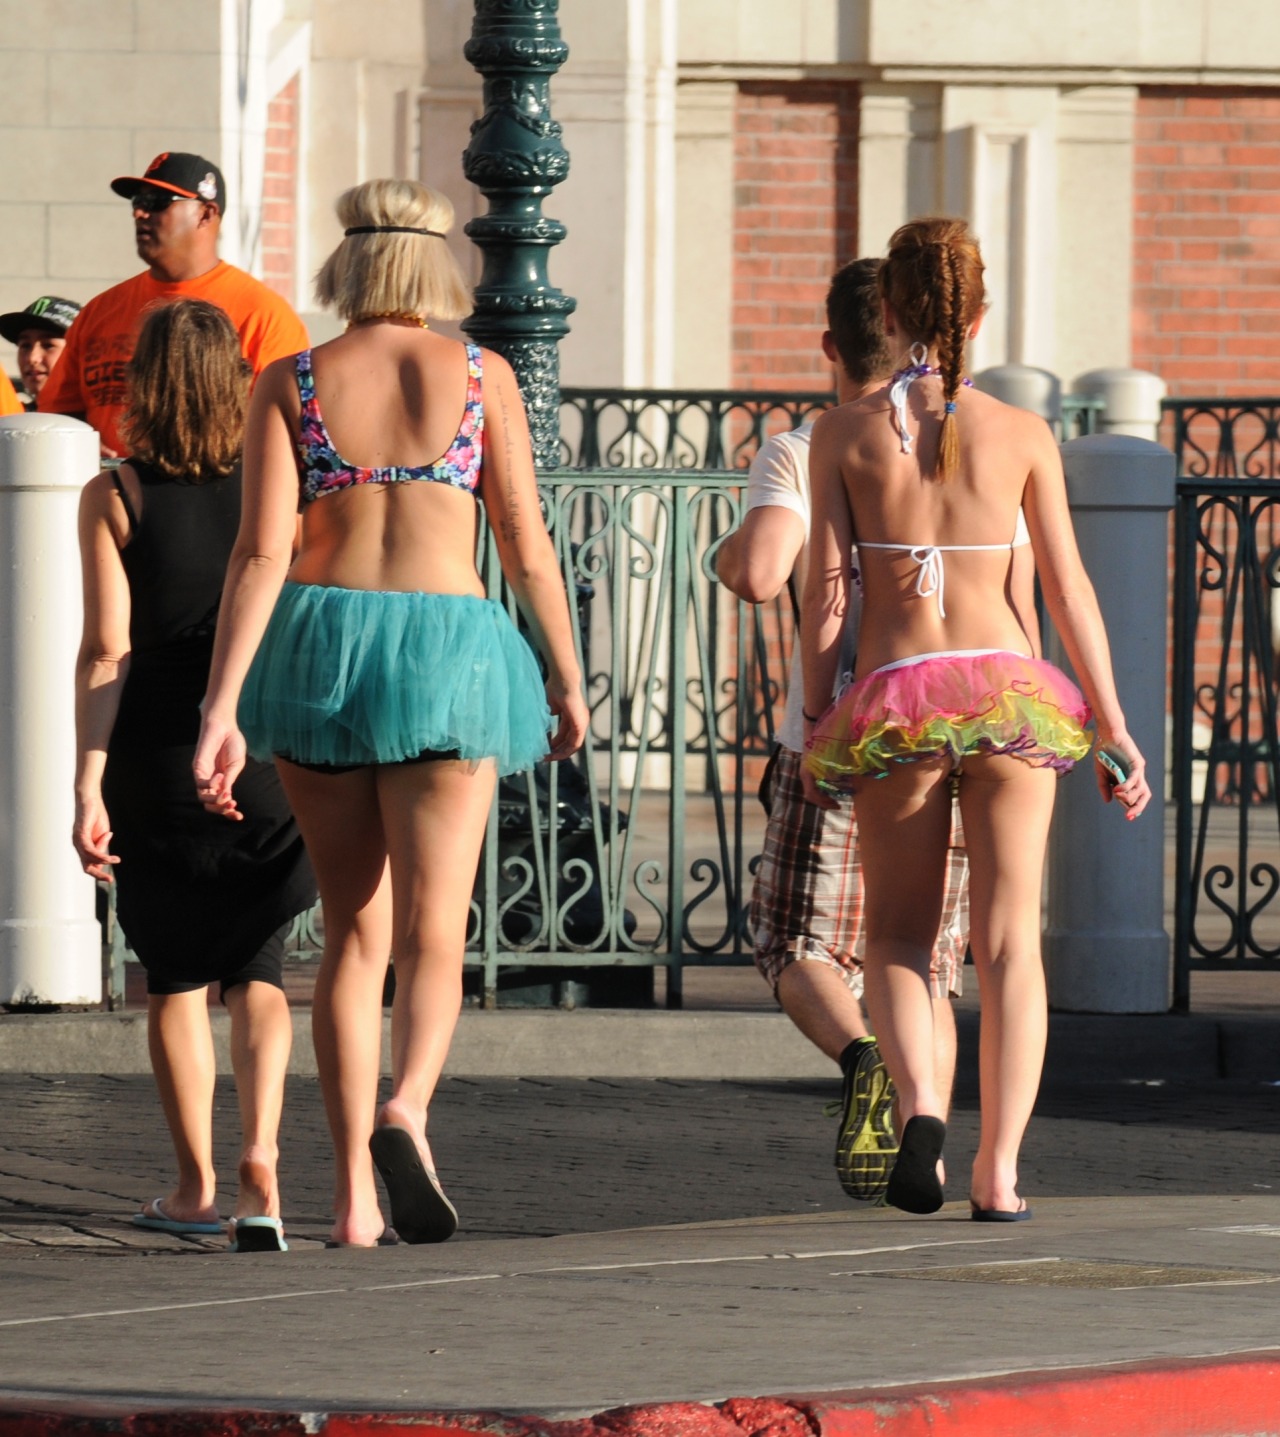 These are from the Electric Daisy Carnival. The one in the rainbow tutu has a very